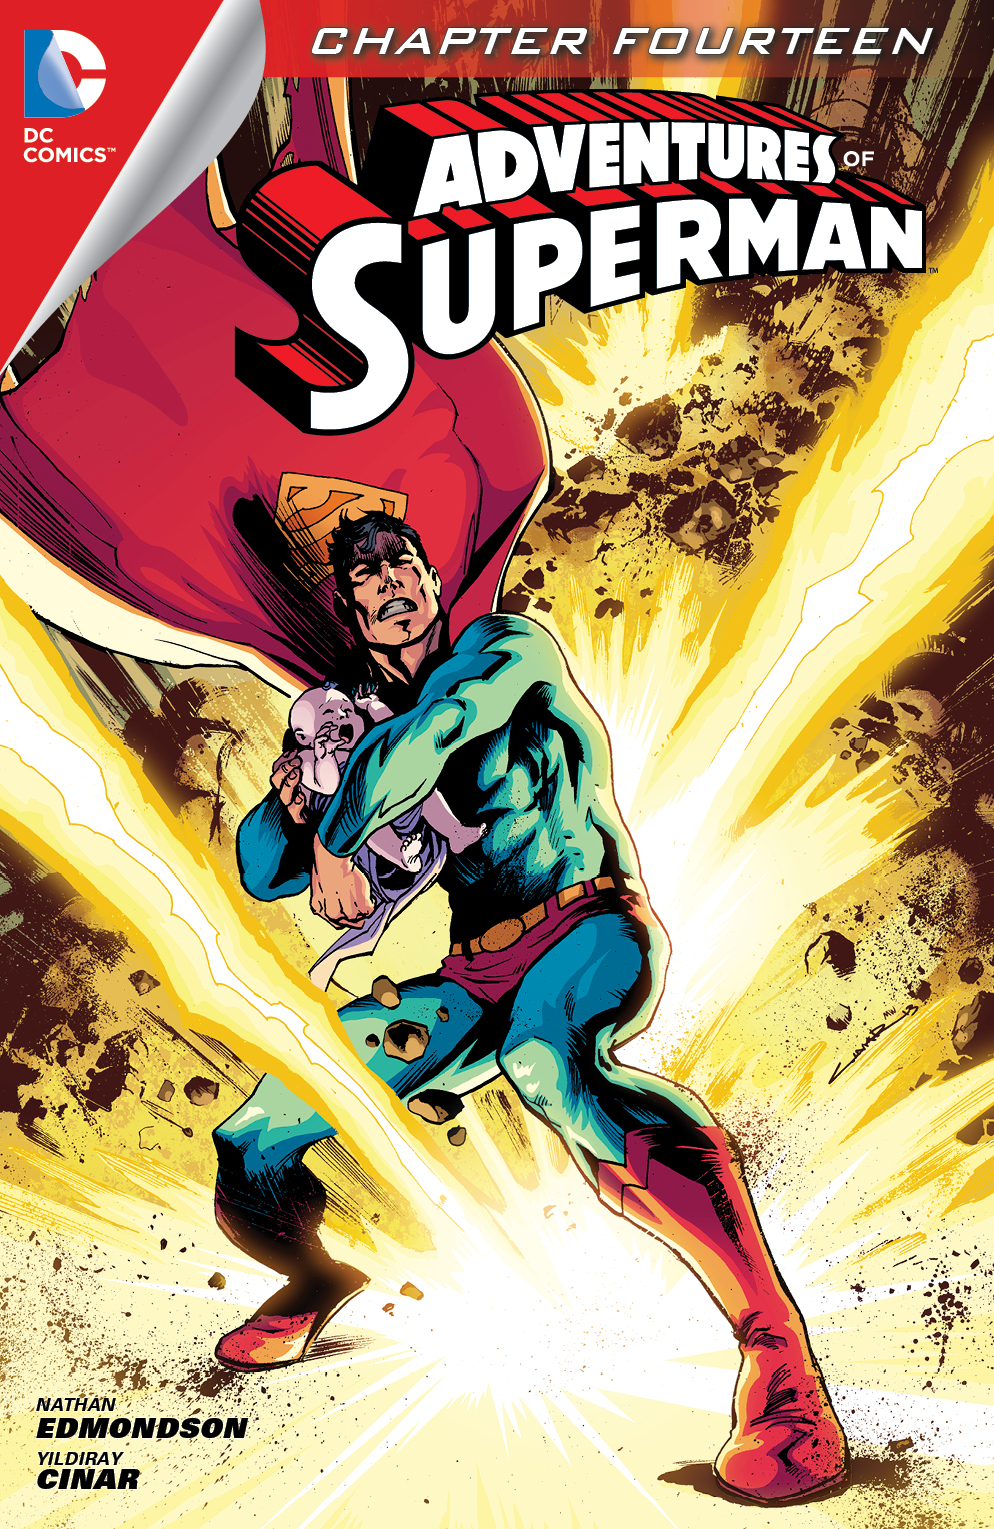 Adventures of Superman (2013-) #14 preview images